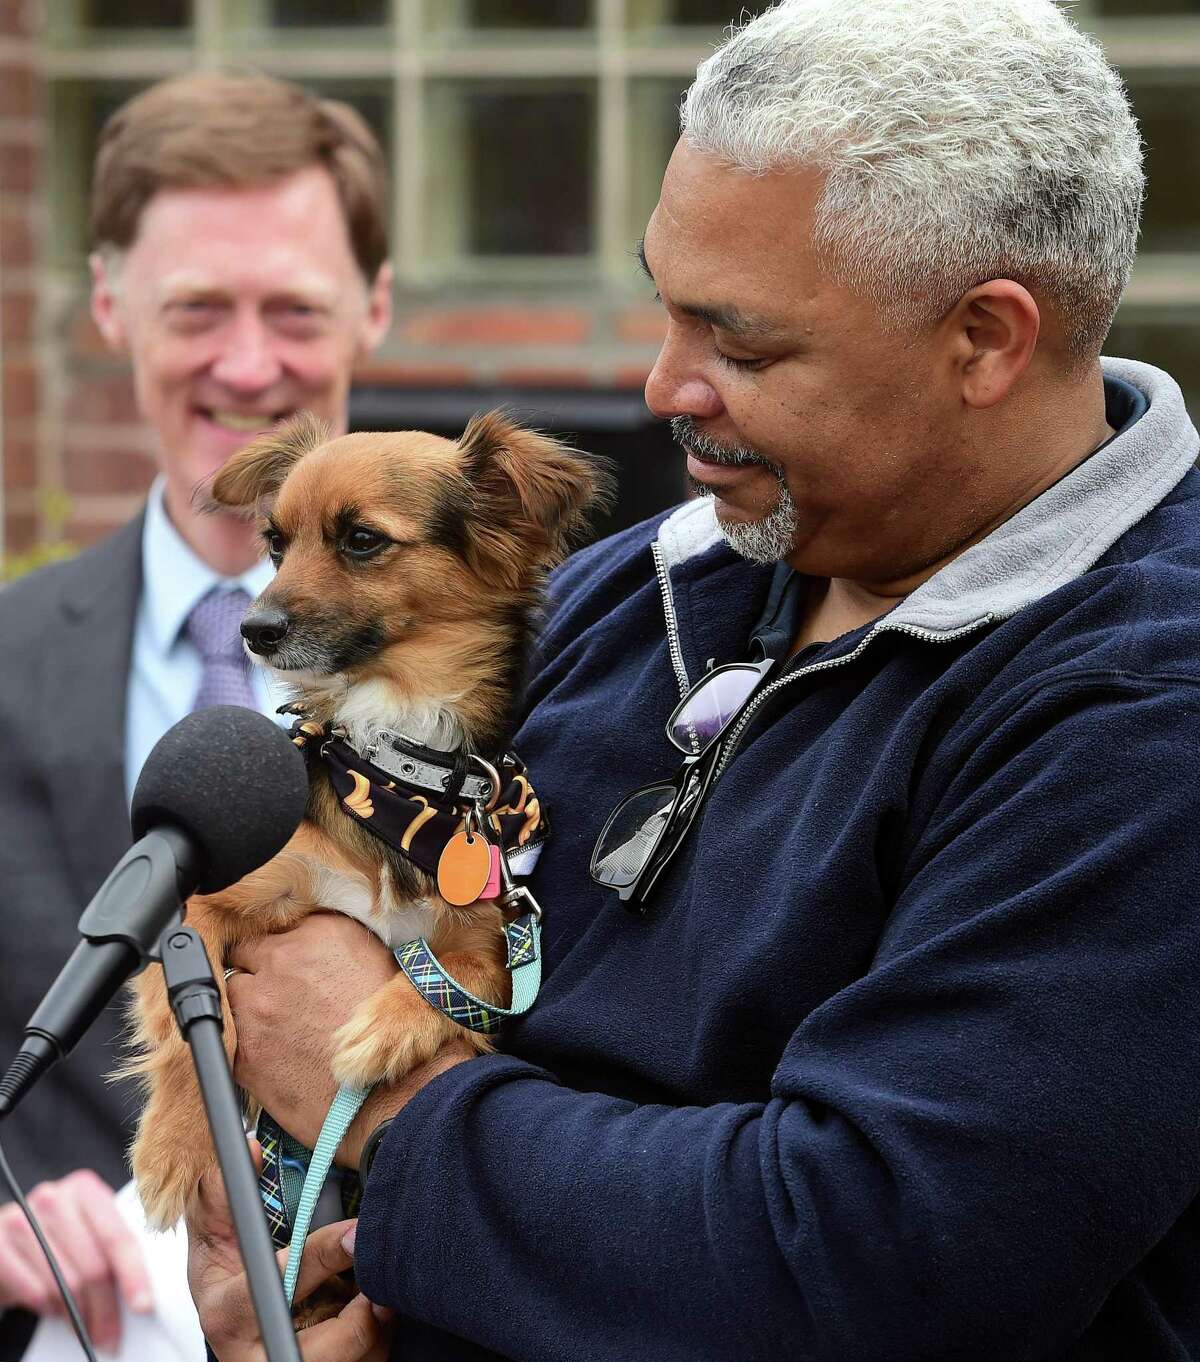 Reginald McGlotten holds his adopted dog, Remi, in front of the Robin I. Kroogman New Haven Animal Shelter on National Puppy Day Wednesday.